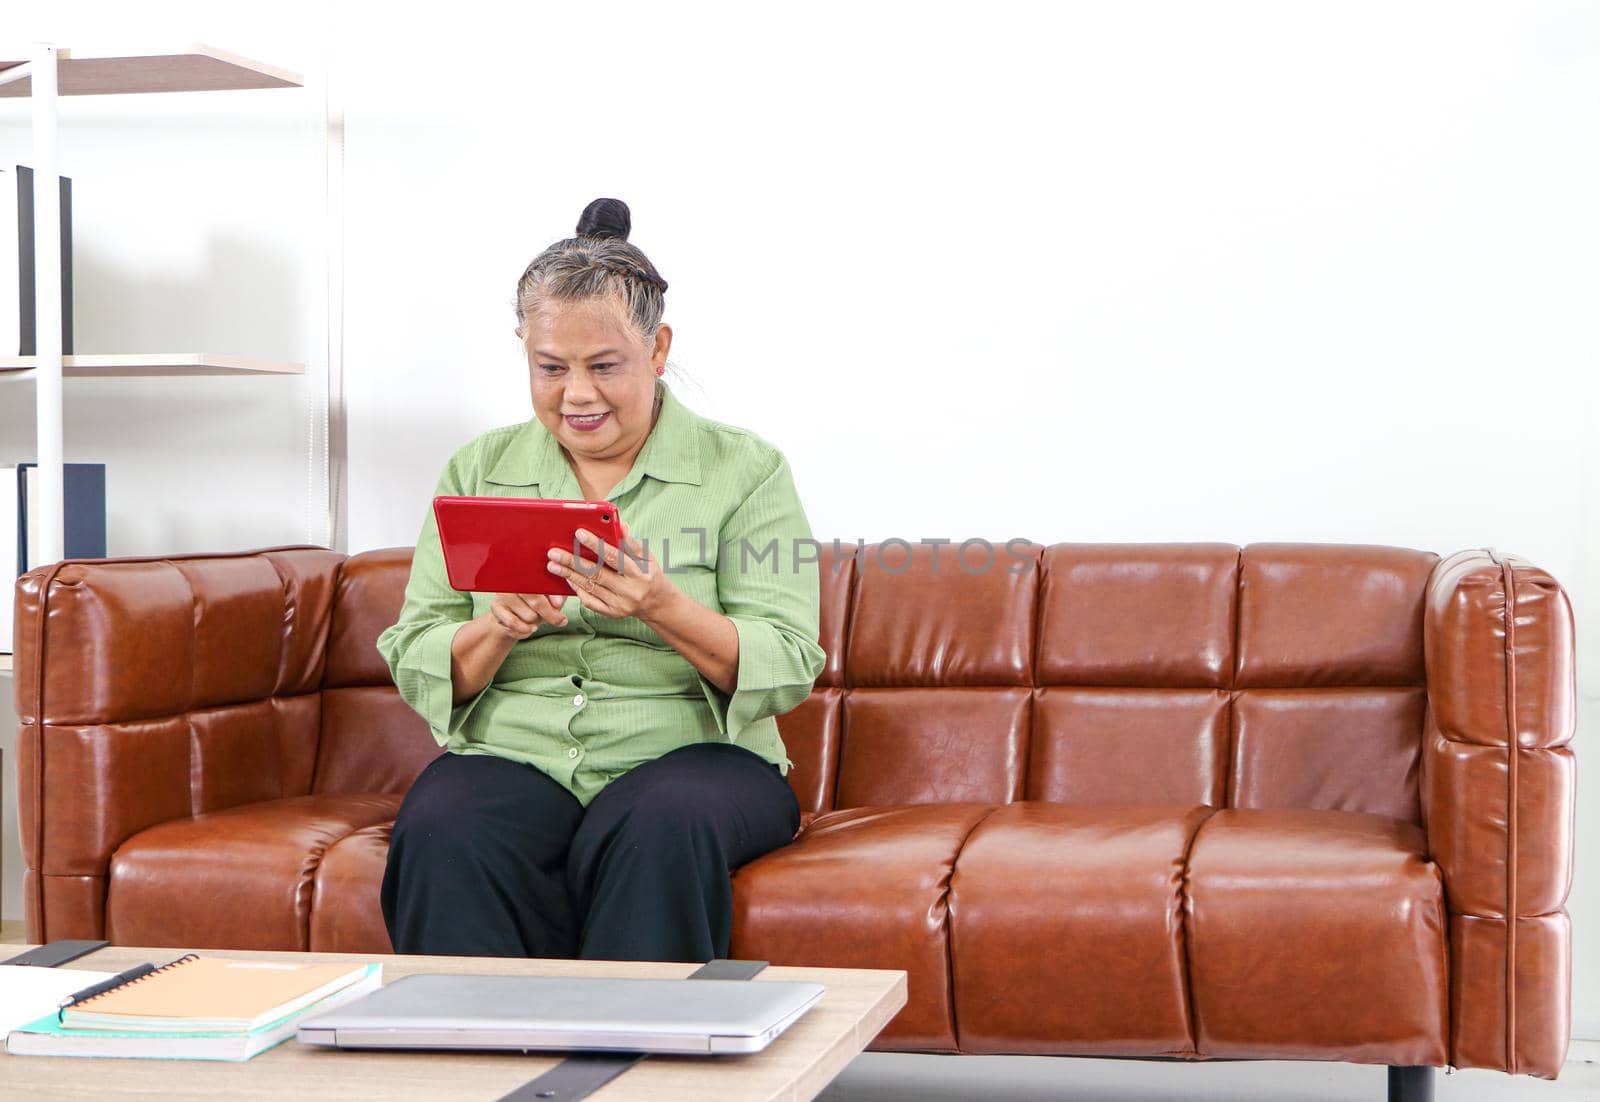 Asian women Retirement Use a smartphone and laptop in the living room concept to work at home. Quarantine to prevent spreading disease Or a conversation with someone far away Via the Internet